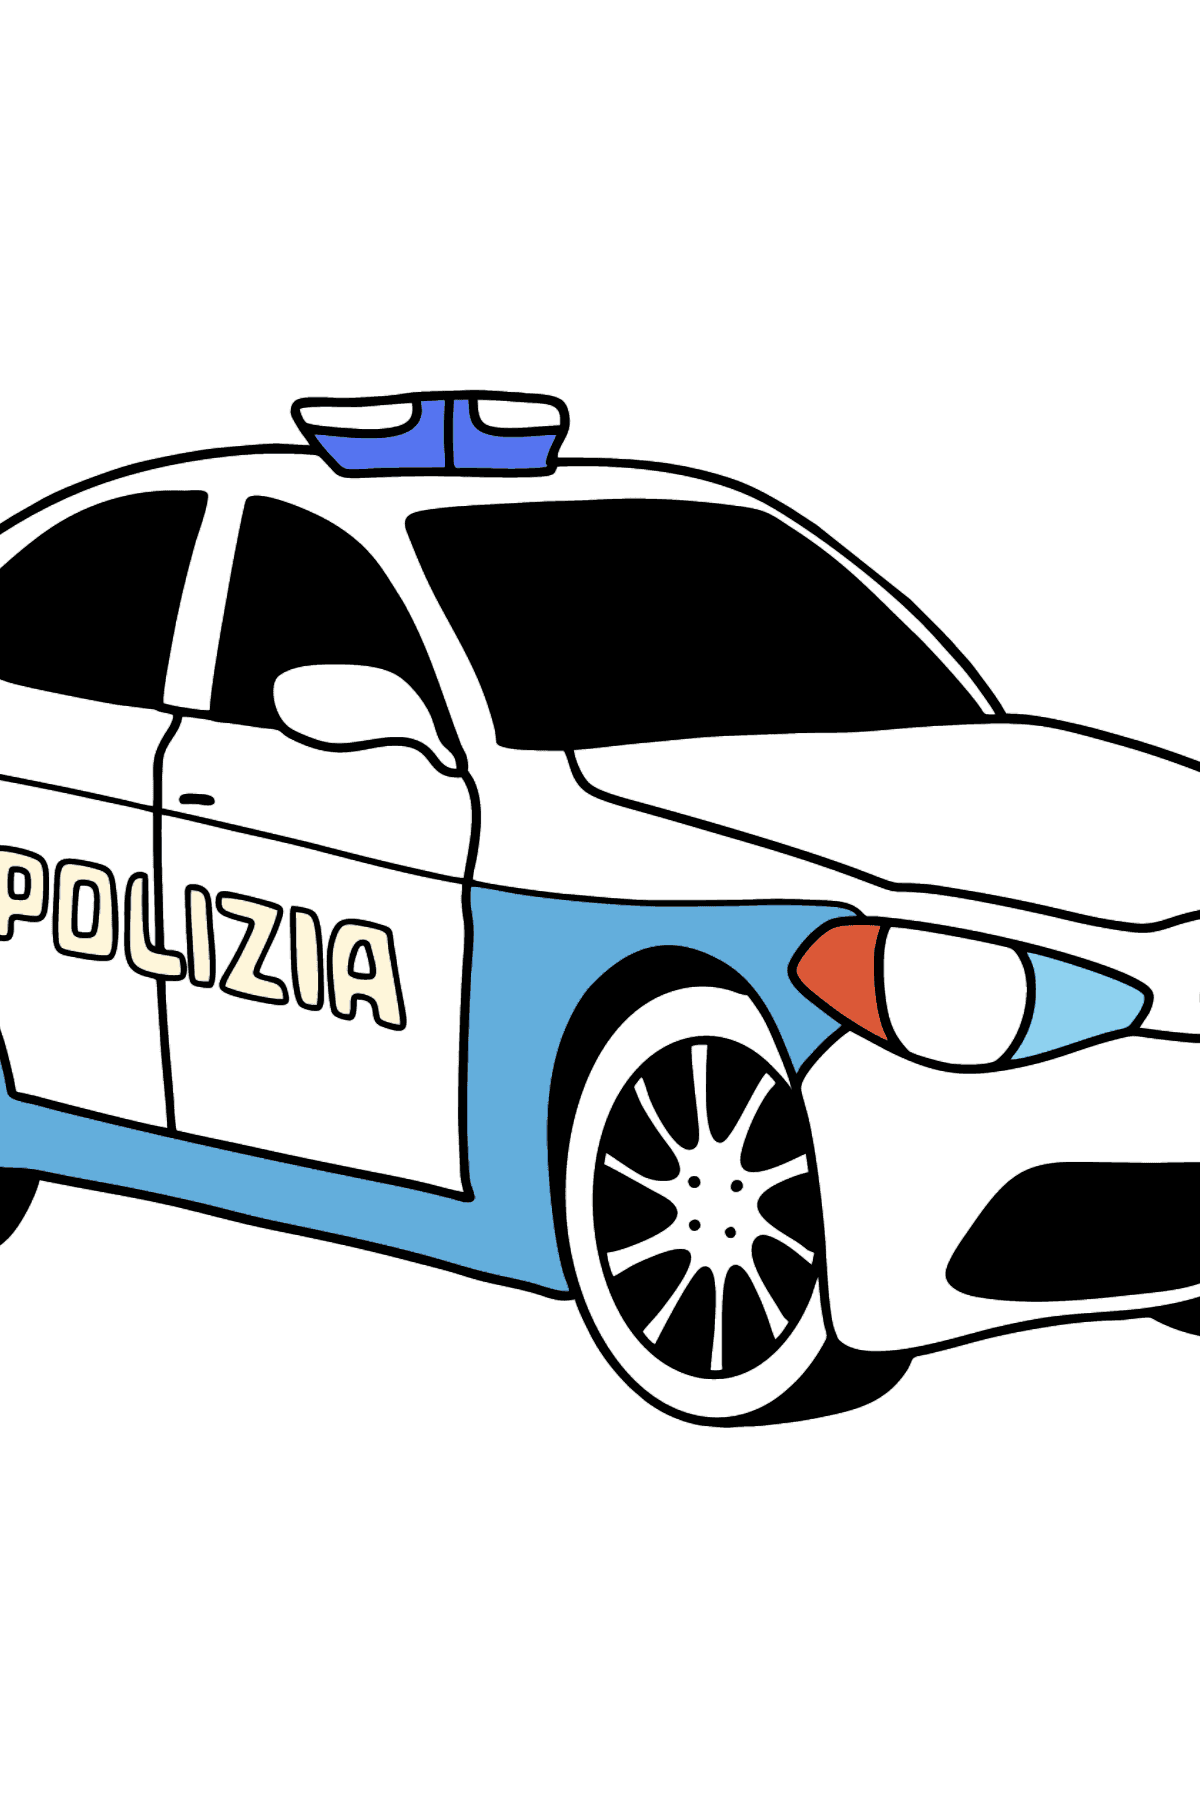 Police Car in Italy coloring page - Coloring Pages for Kids